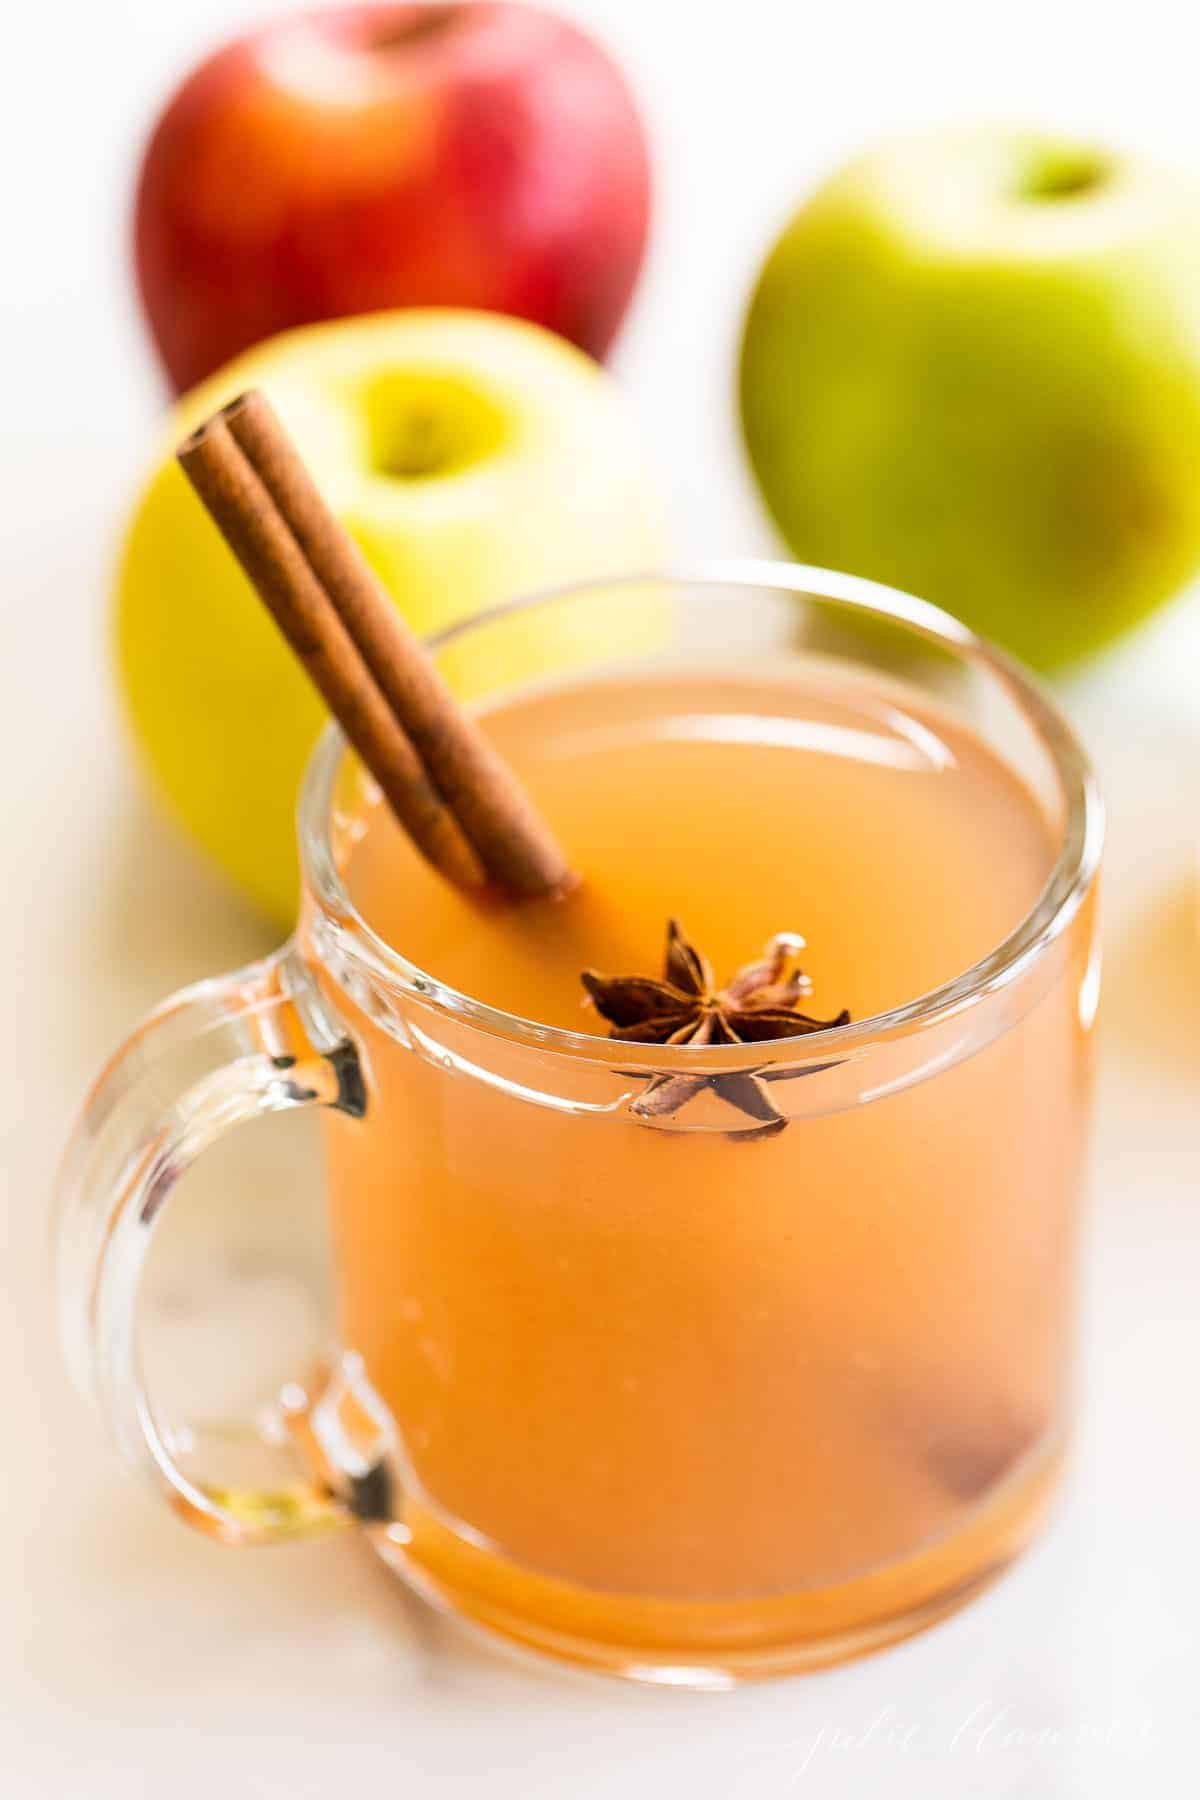 A clear glass mug full of warm apple cider for a virtual thanksgiving celebration.